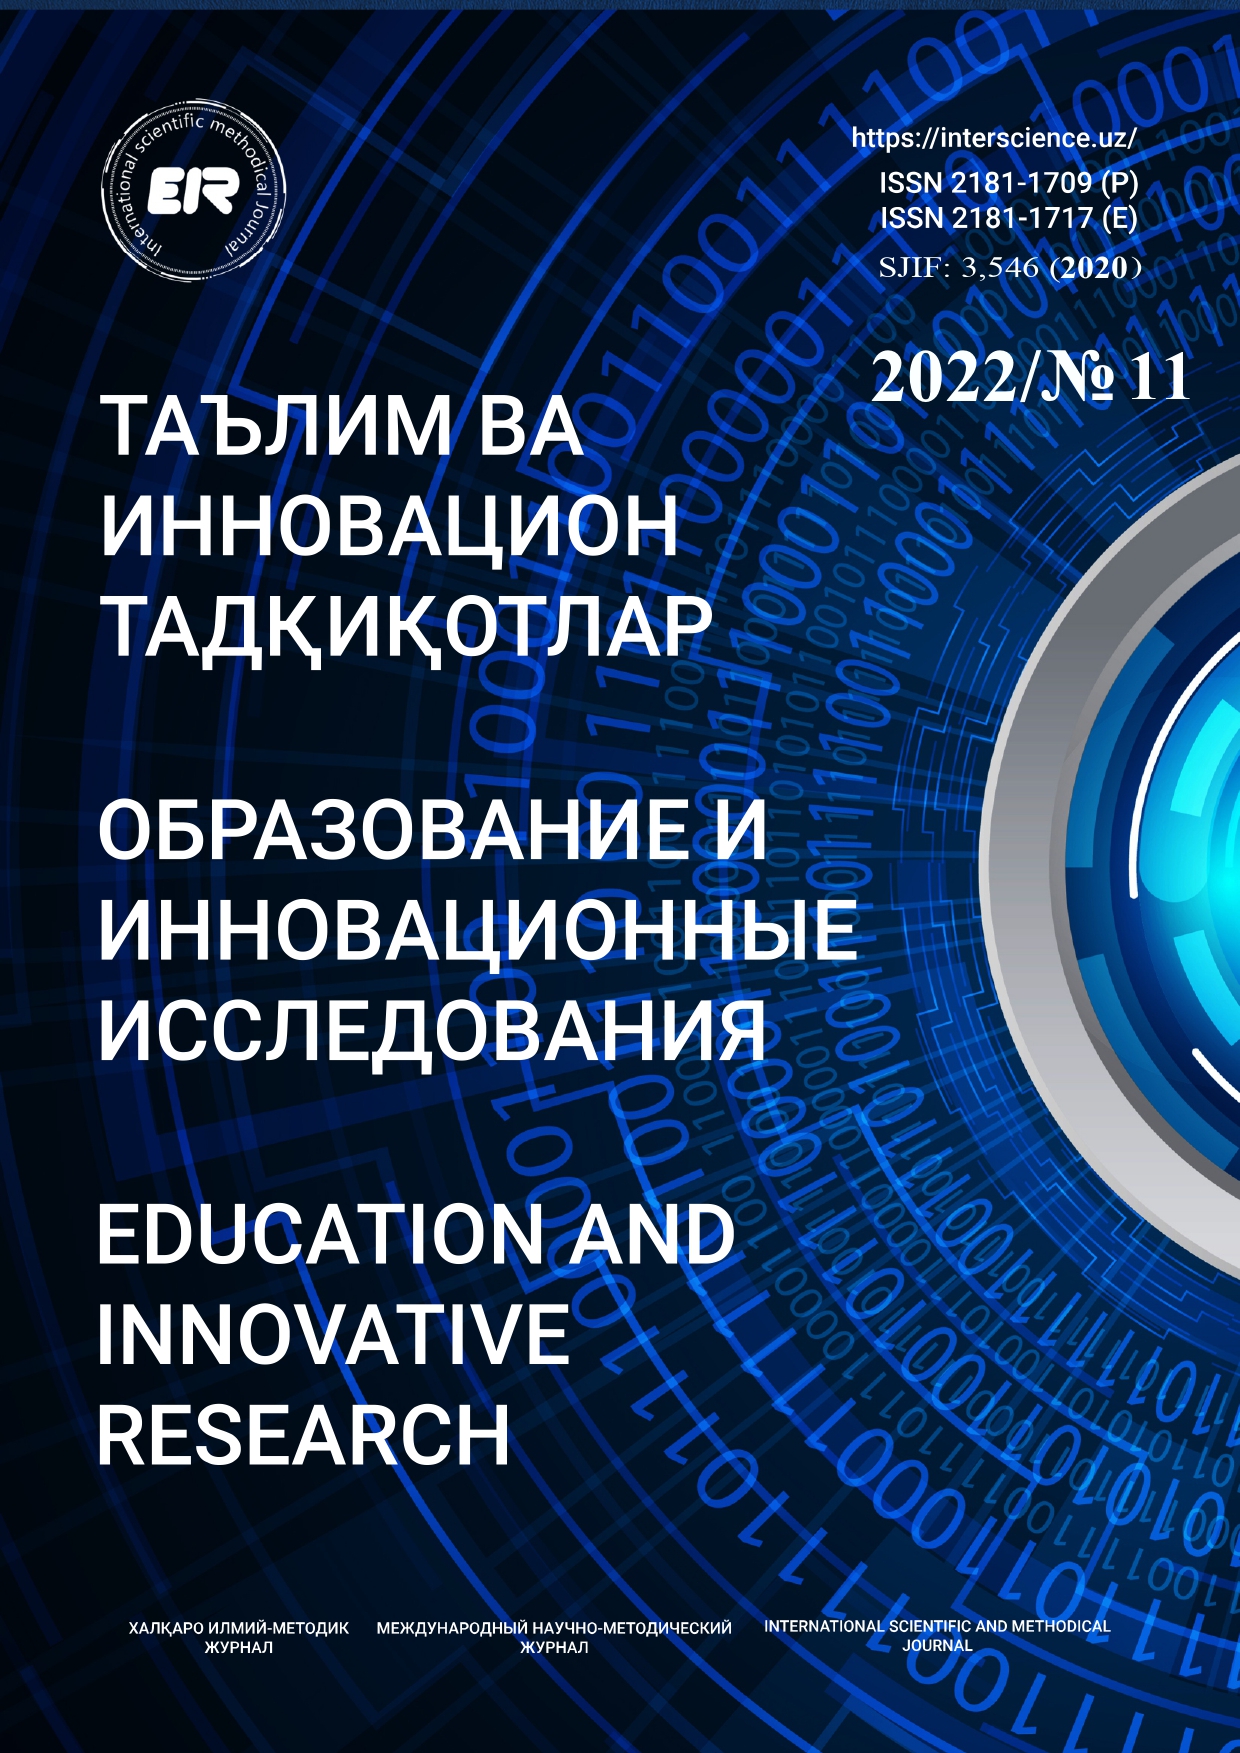 					View No. 11 (2022): Education and innovative research
				